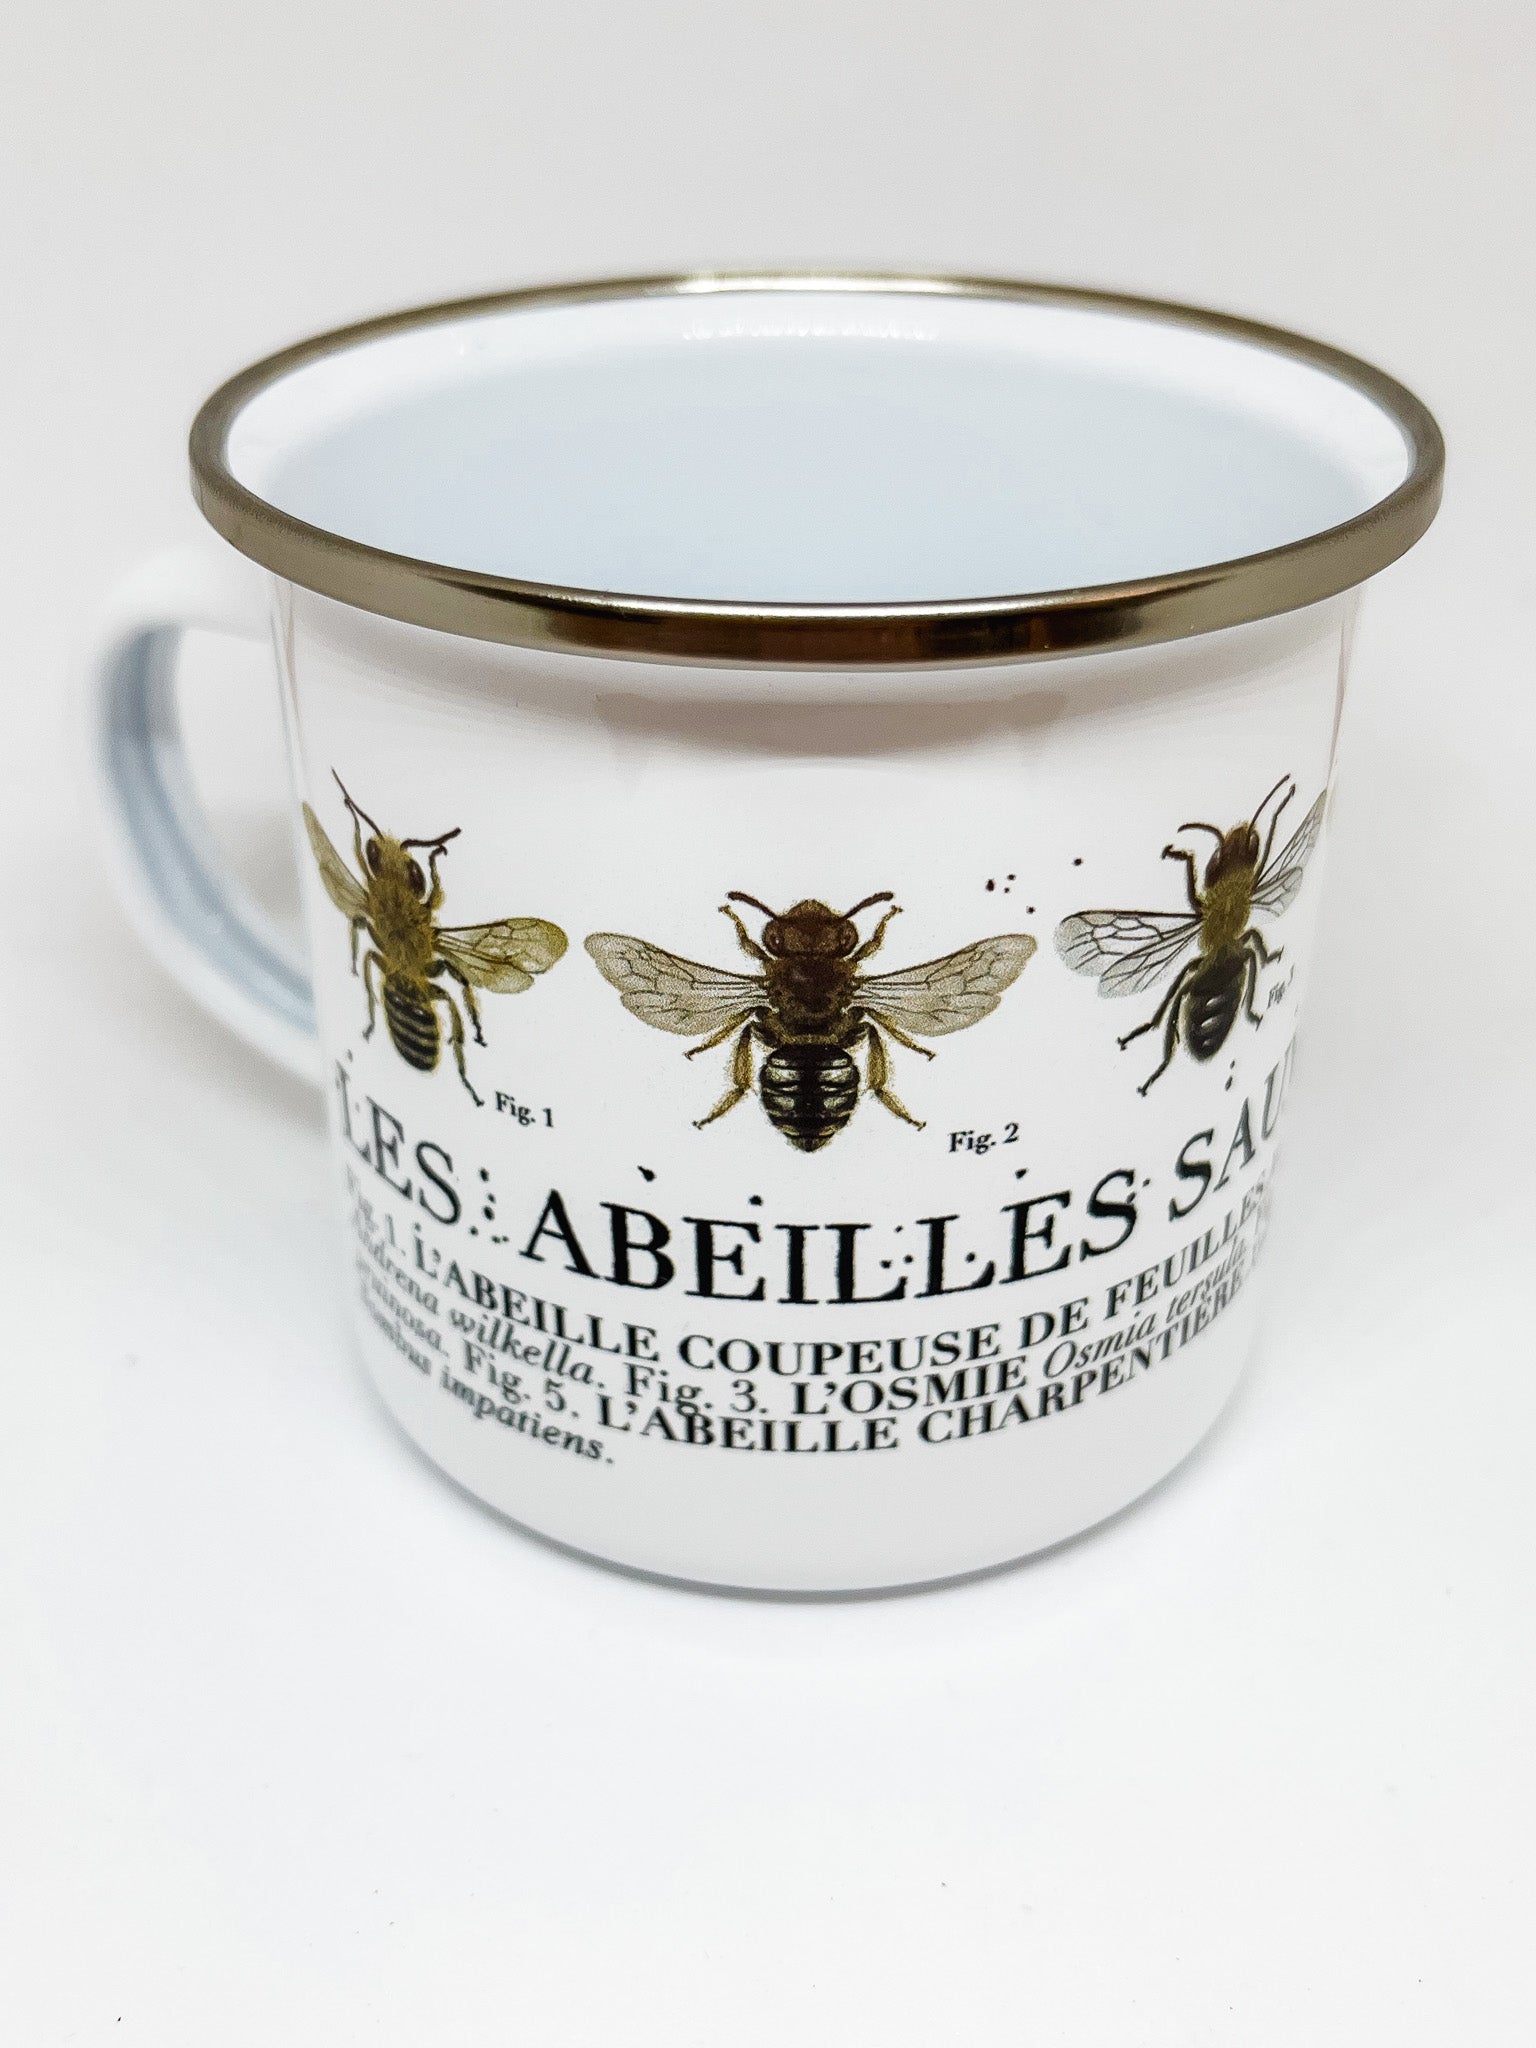 White enamel mug with silver rim and illustrations of wild quebec bees with text below identifying each bee. Figures 1 and 2 visible